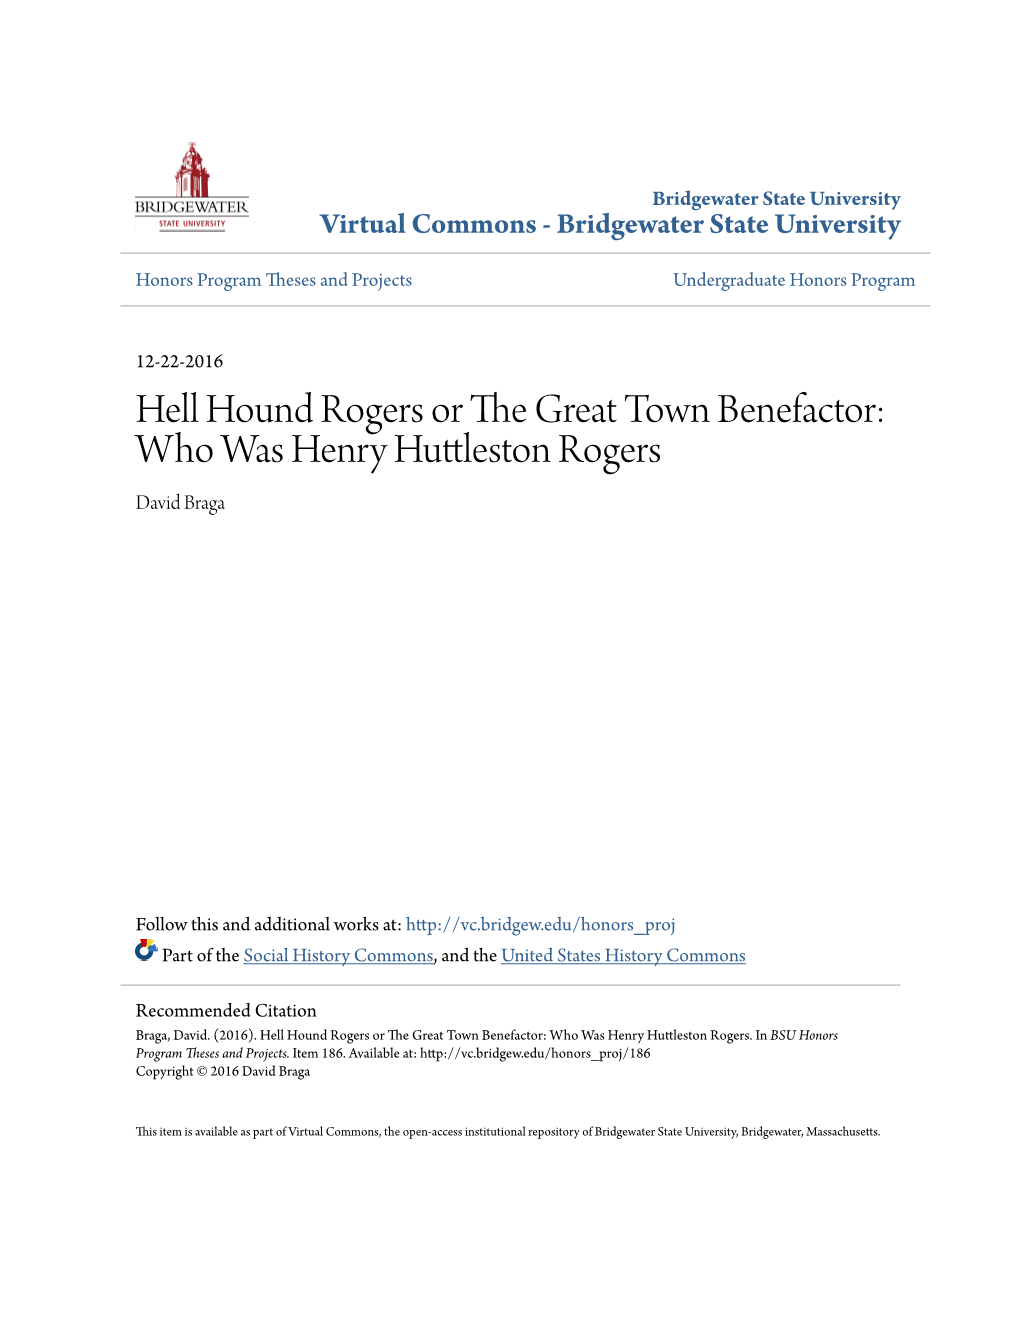 Hell Hound Rogers Or the Great Town Benefactor: Who Was Henry Huttleston Rogers David Braga